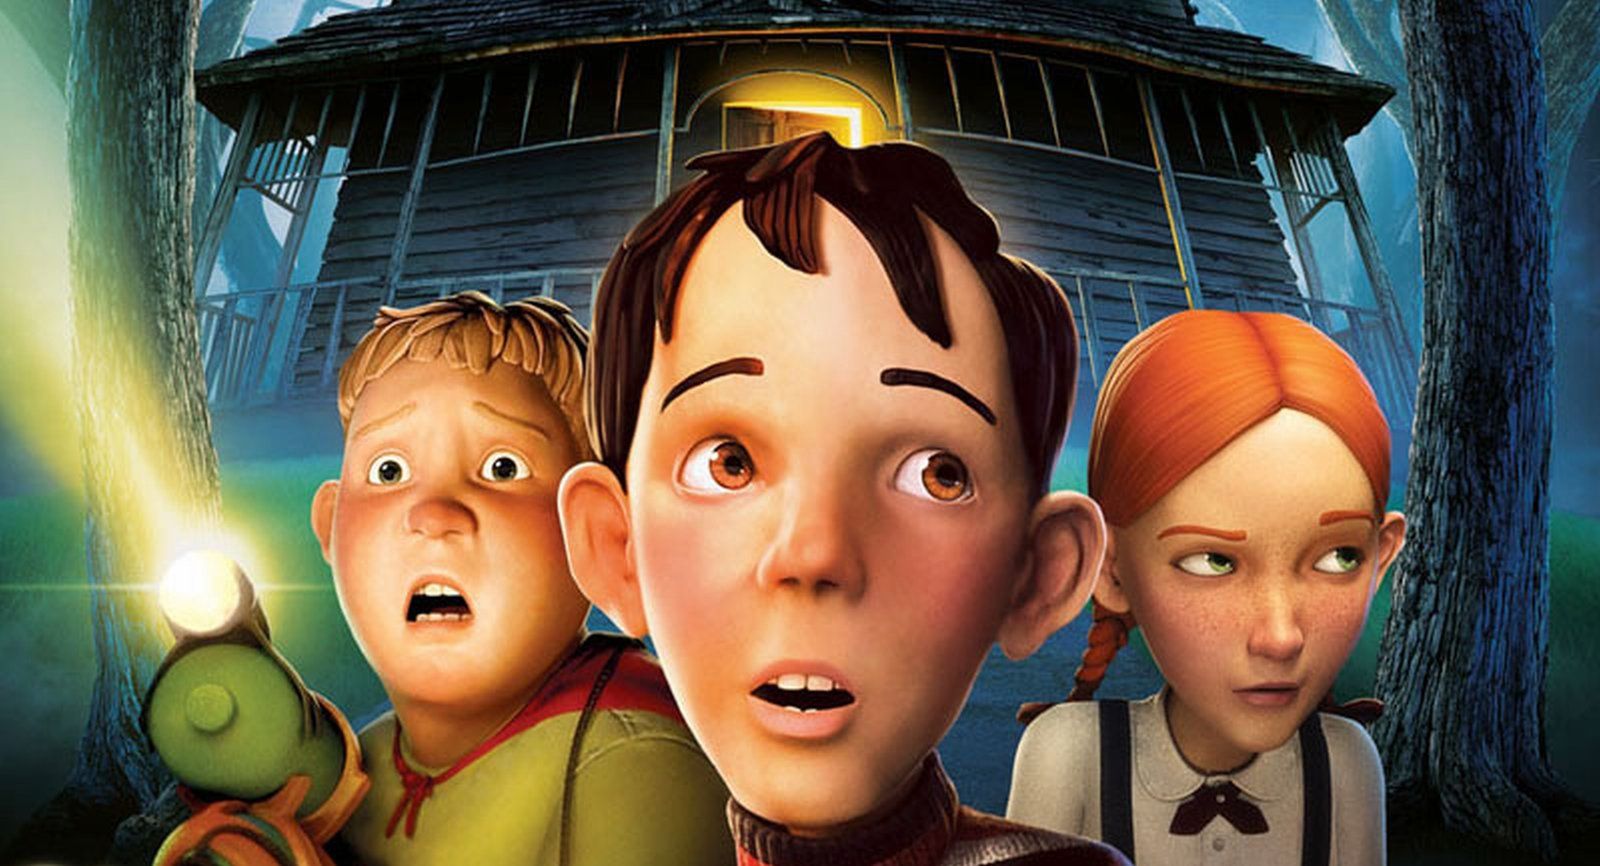 1600x866px Monster House (212.12 KB).06.2015